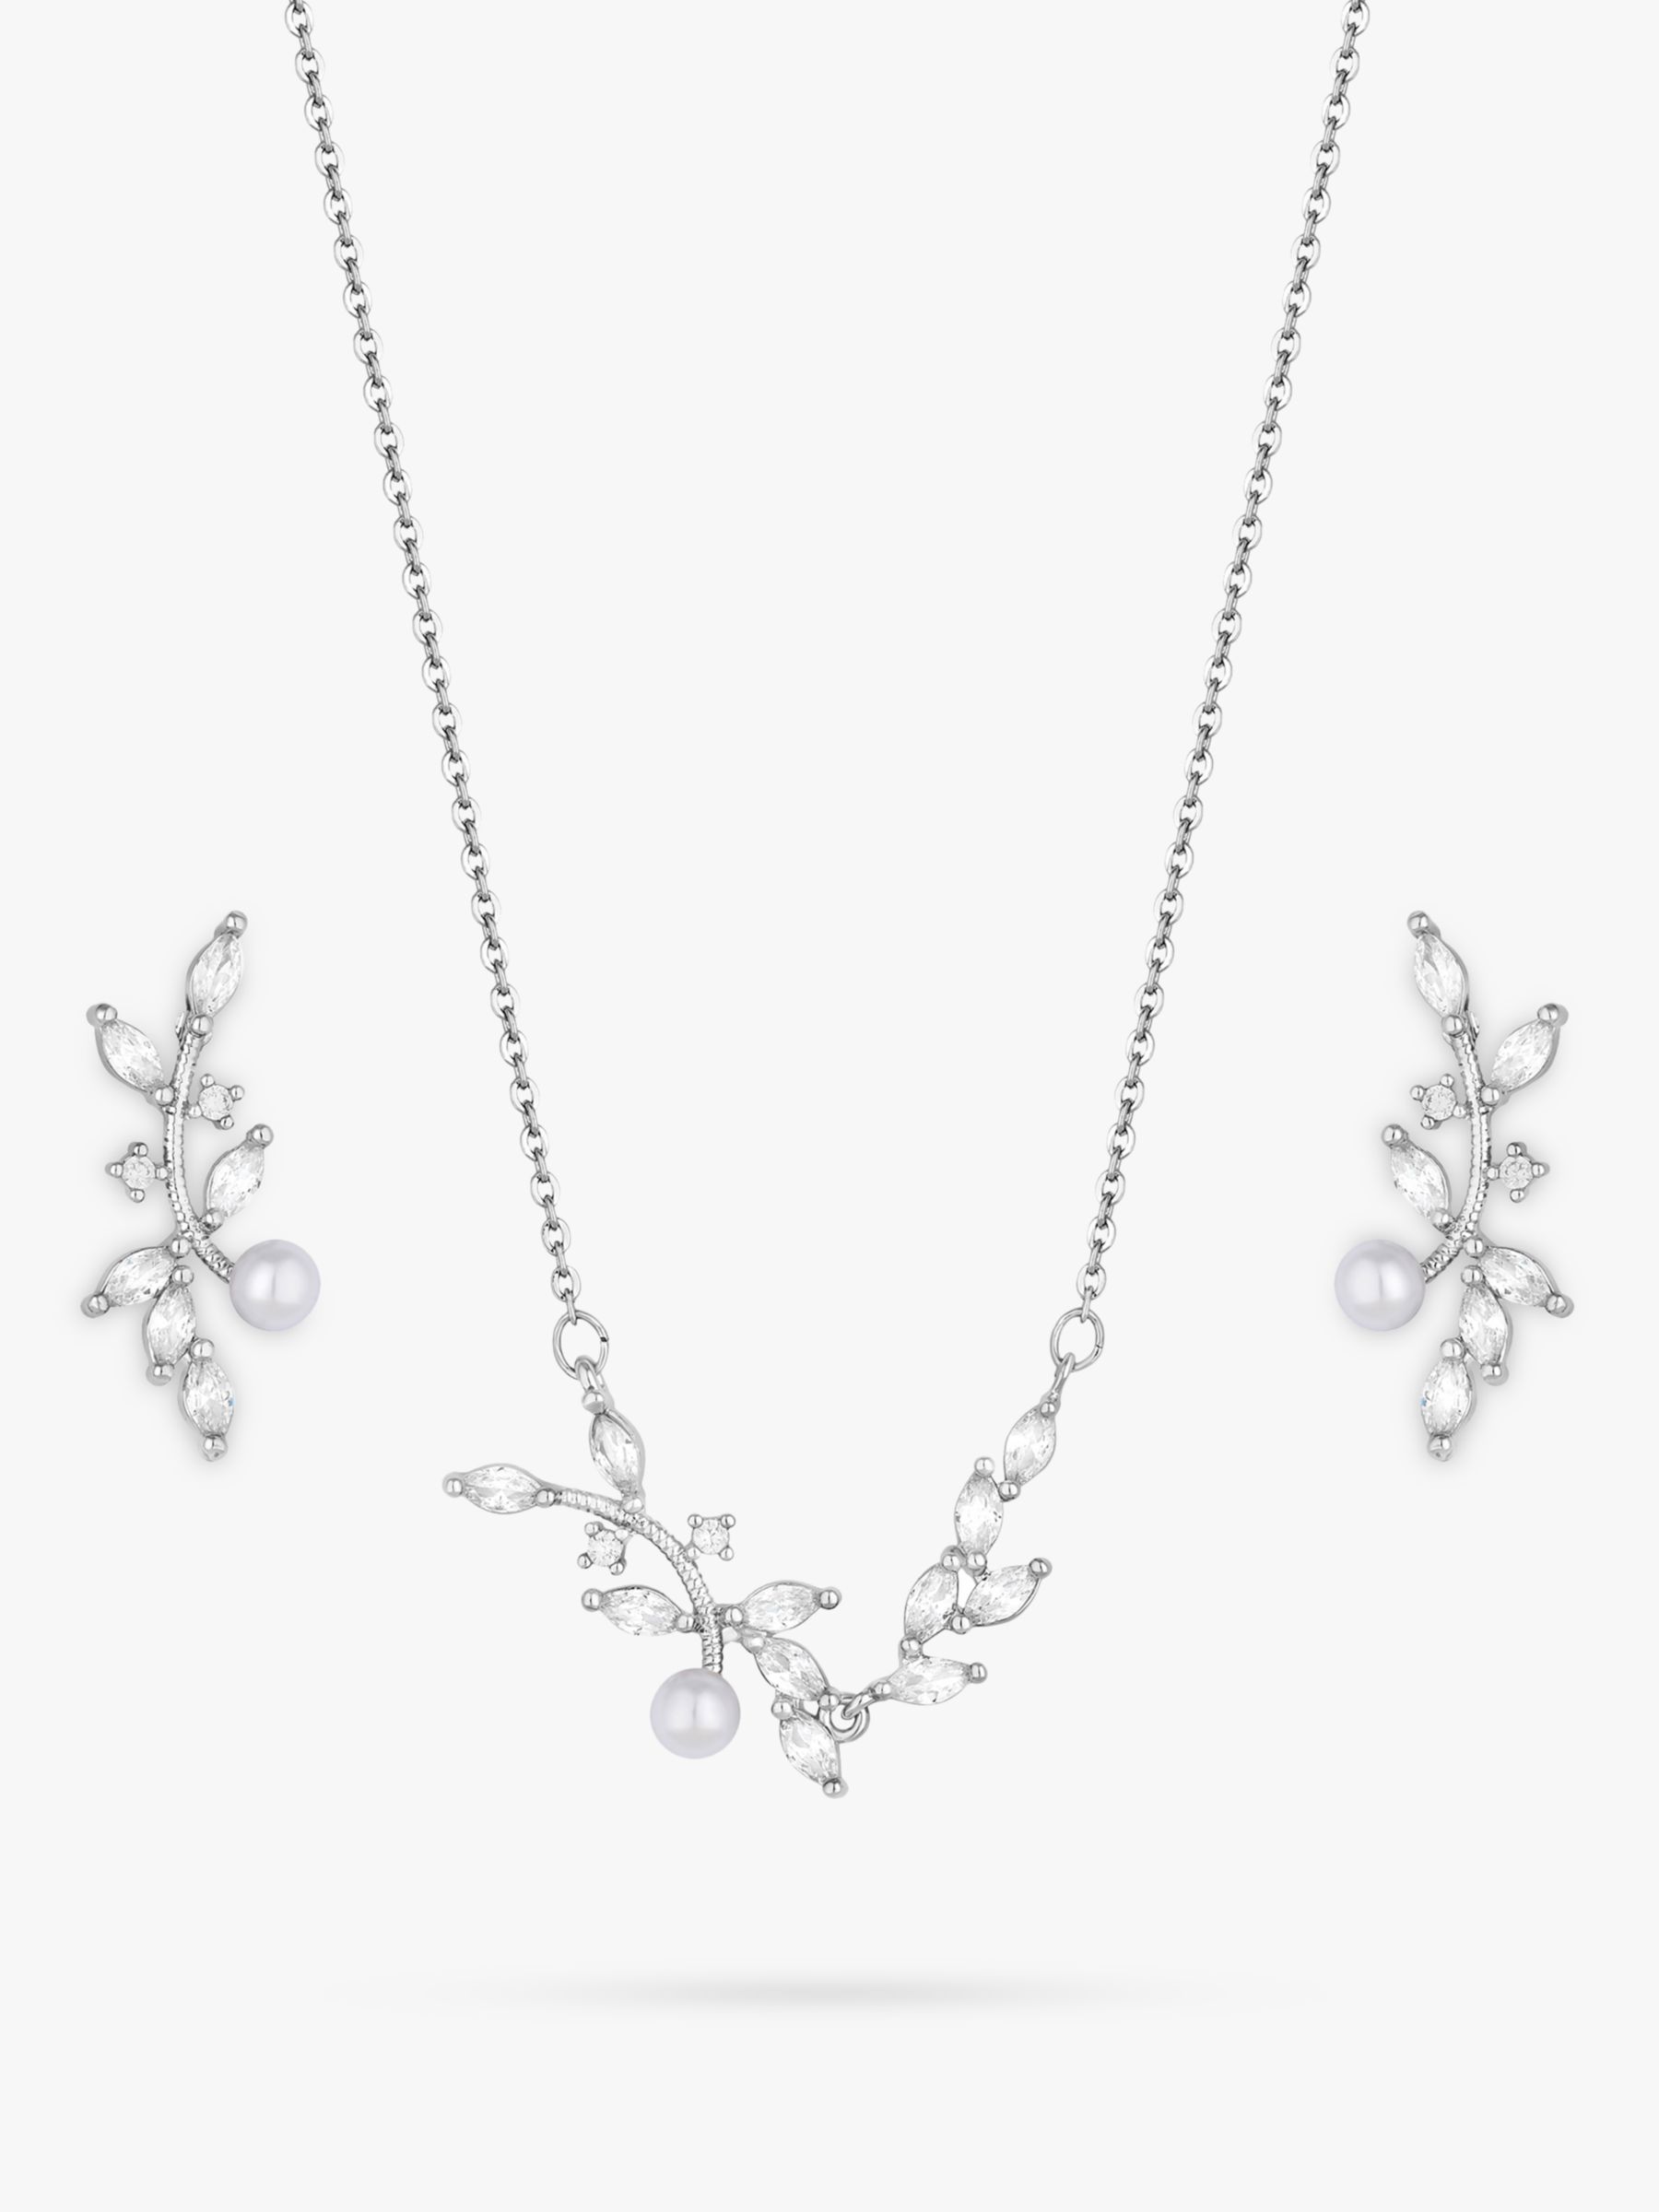 Buy Jon Richard Pearl & Cubic Zirconia Vine Necklace and Earrings Jewellery Set, Silver Online at johnlewis.com